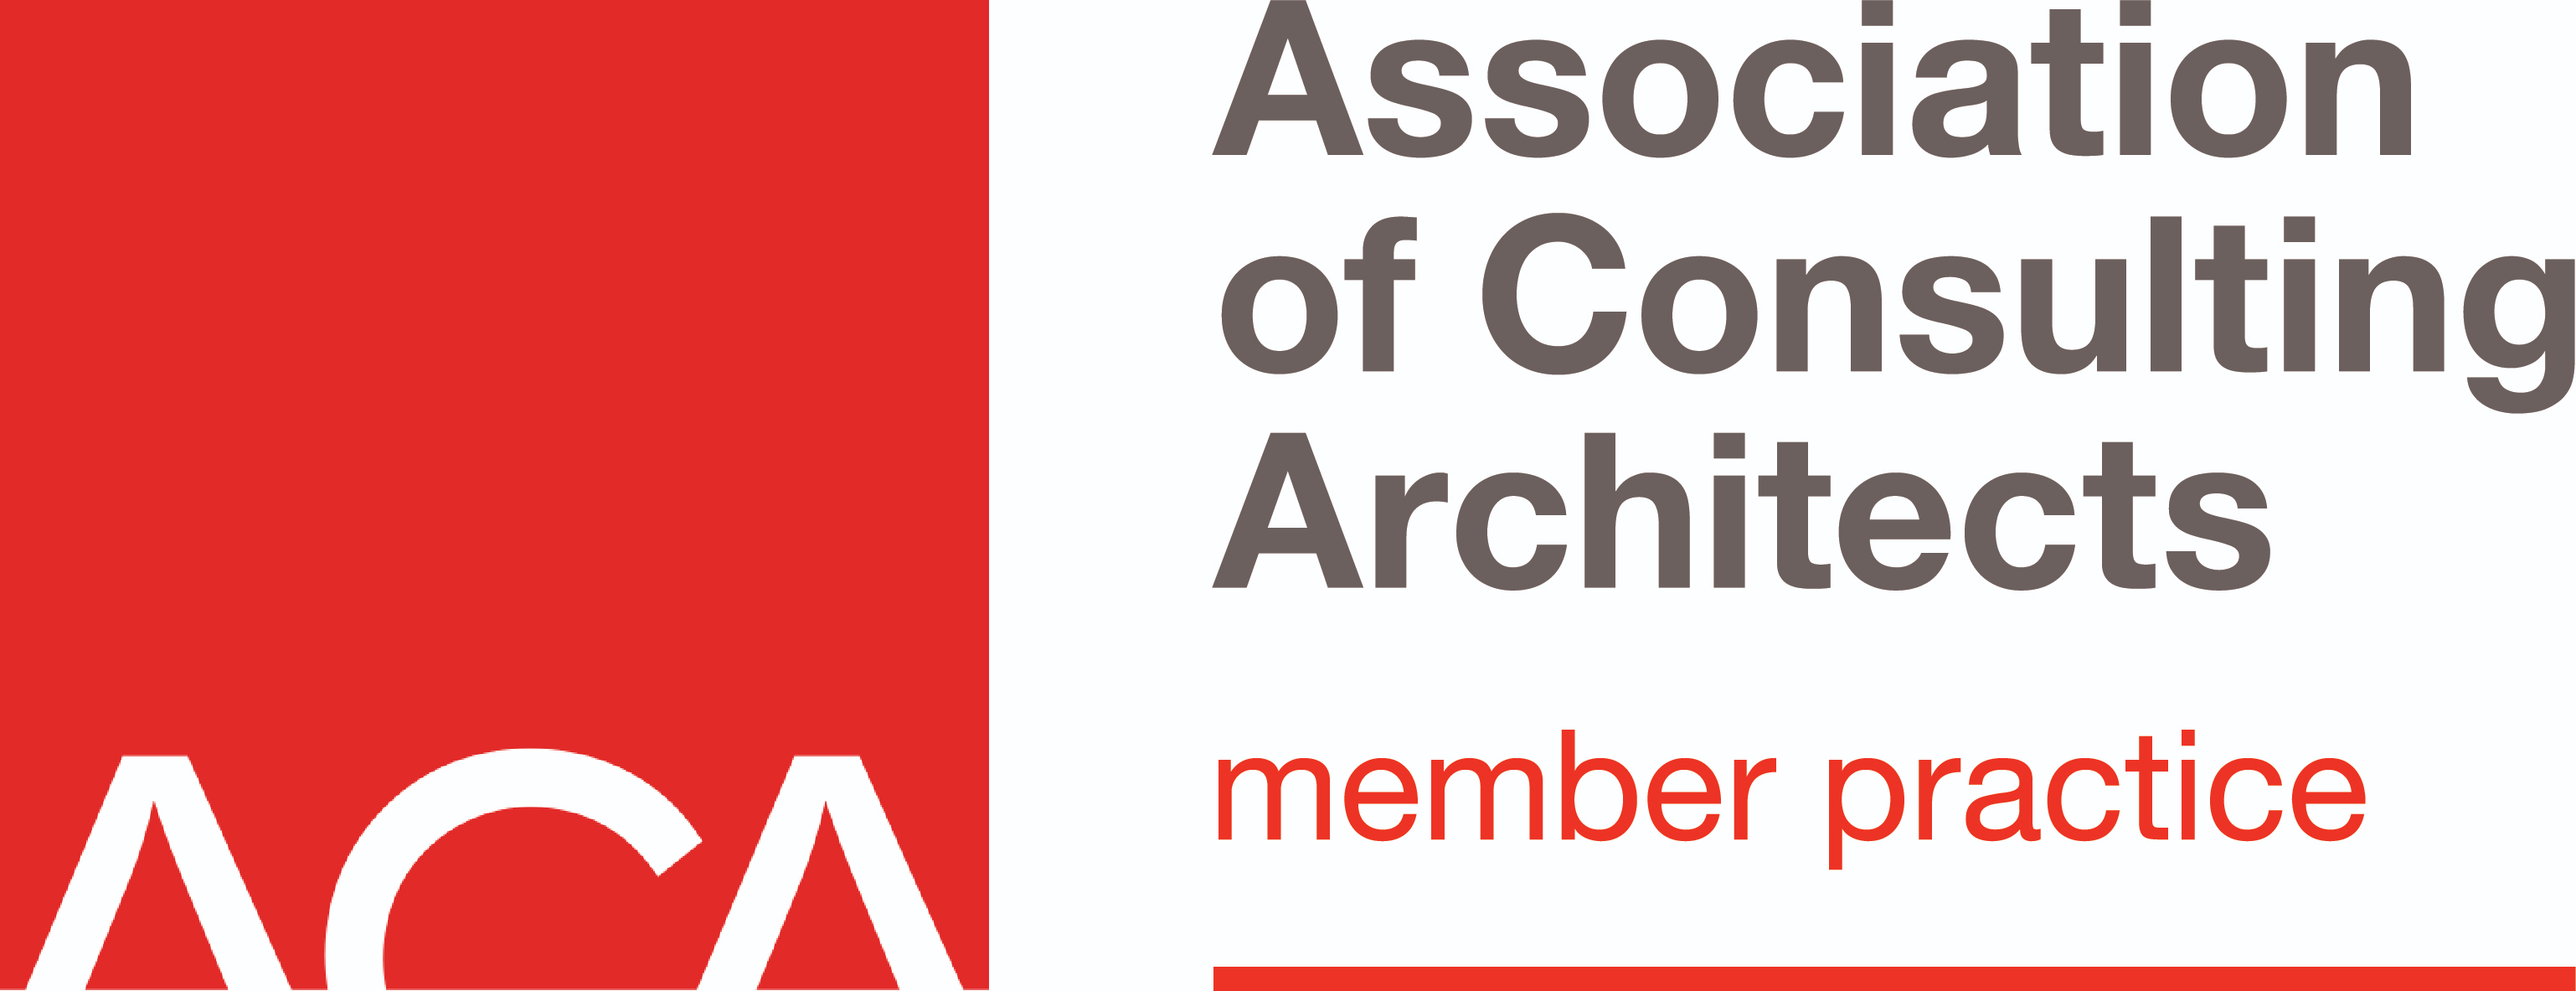 Association of Consulting Architects - memver practice